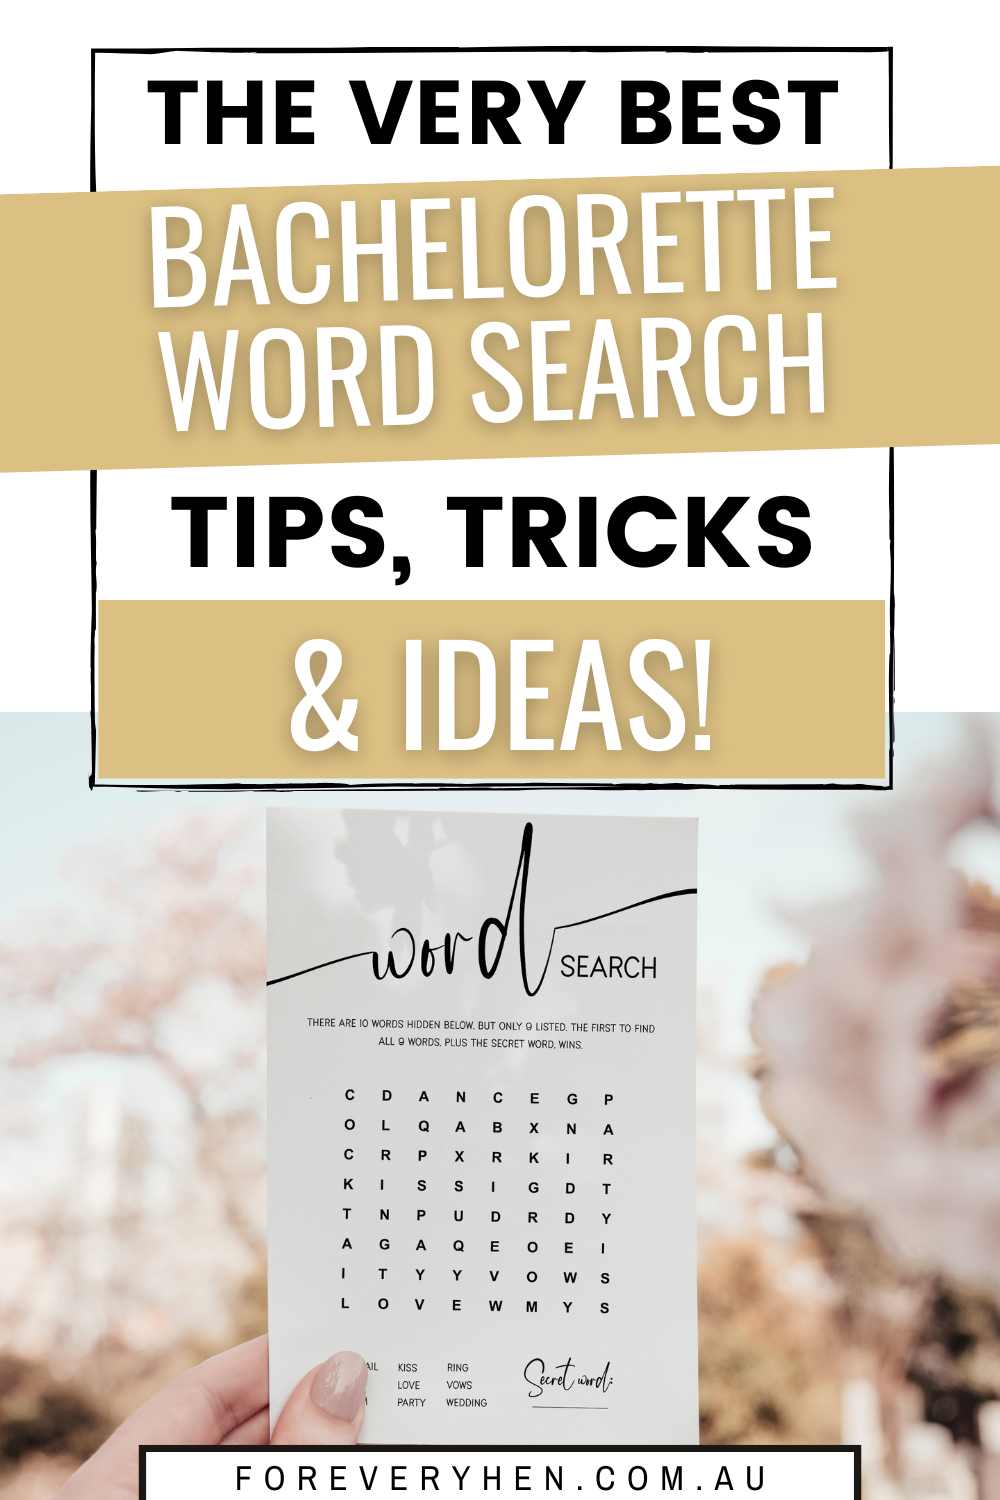 Image of a bachelorette word search. Text overlay: The very best bachelorette word search tips, tricks and ideas!